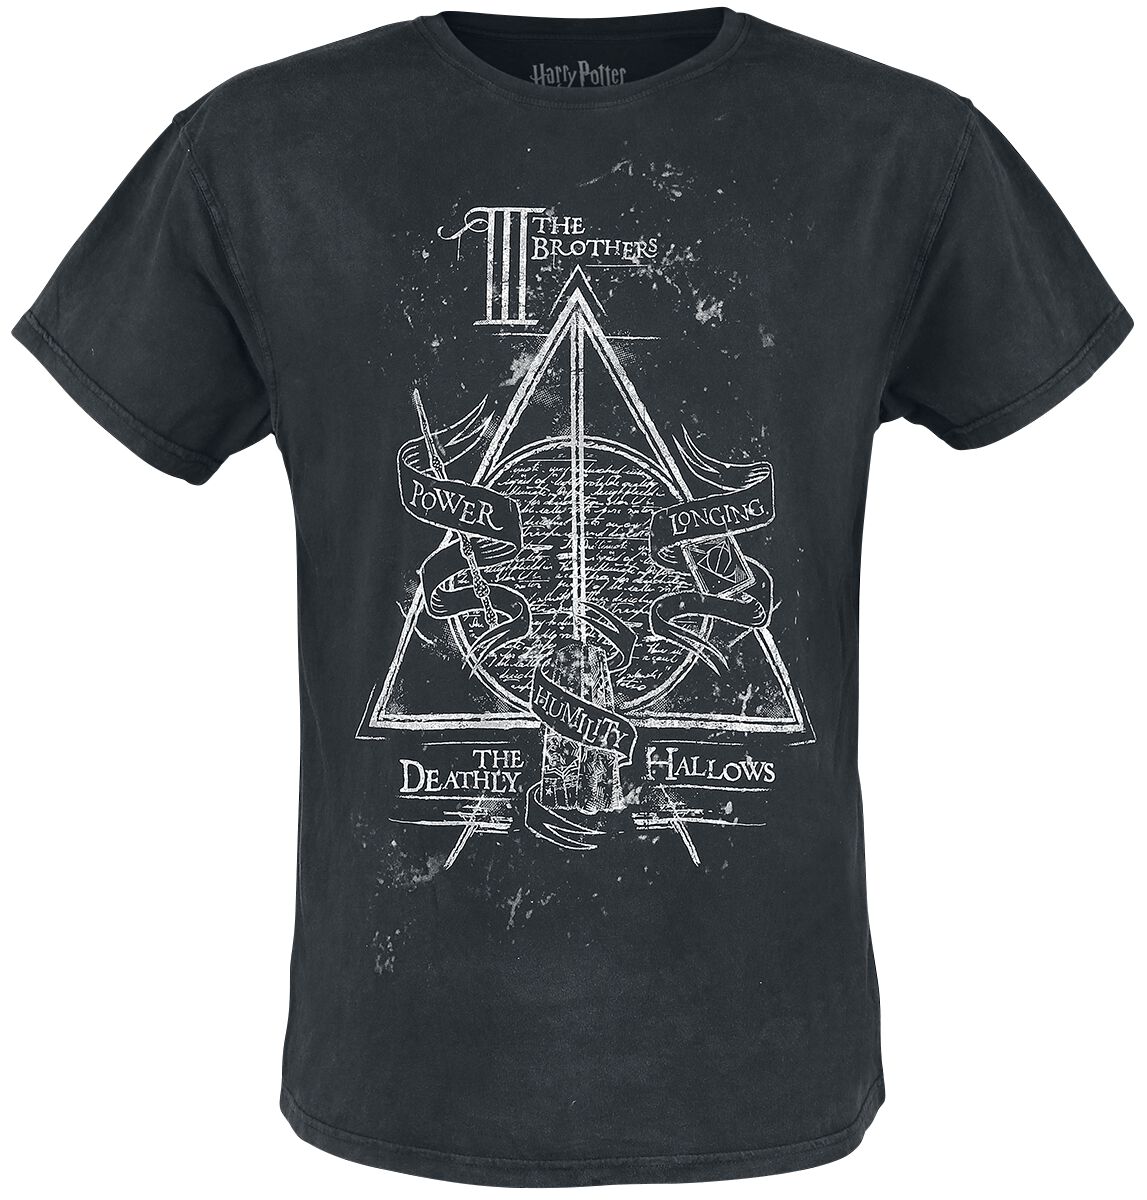 Harry Potter The Deathly Hallows T-Shirt schwarz in M